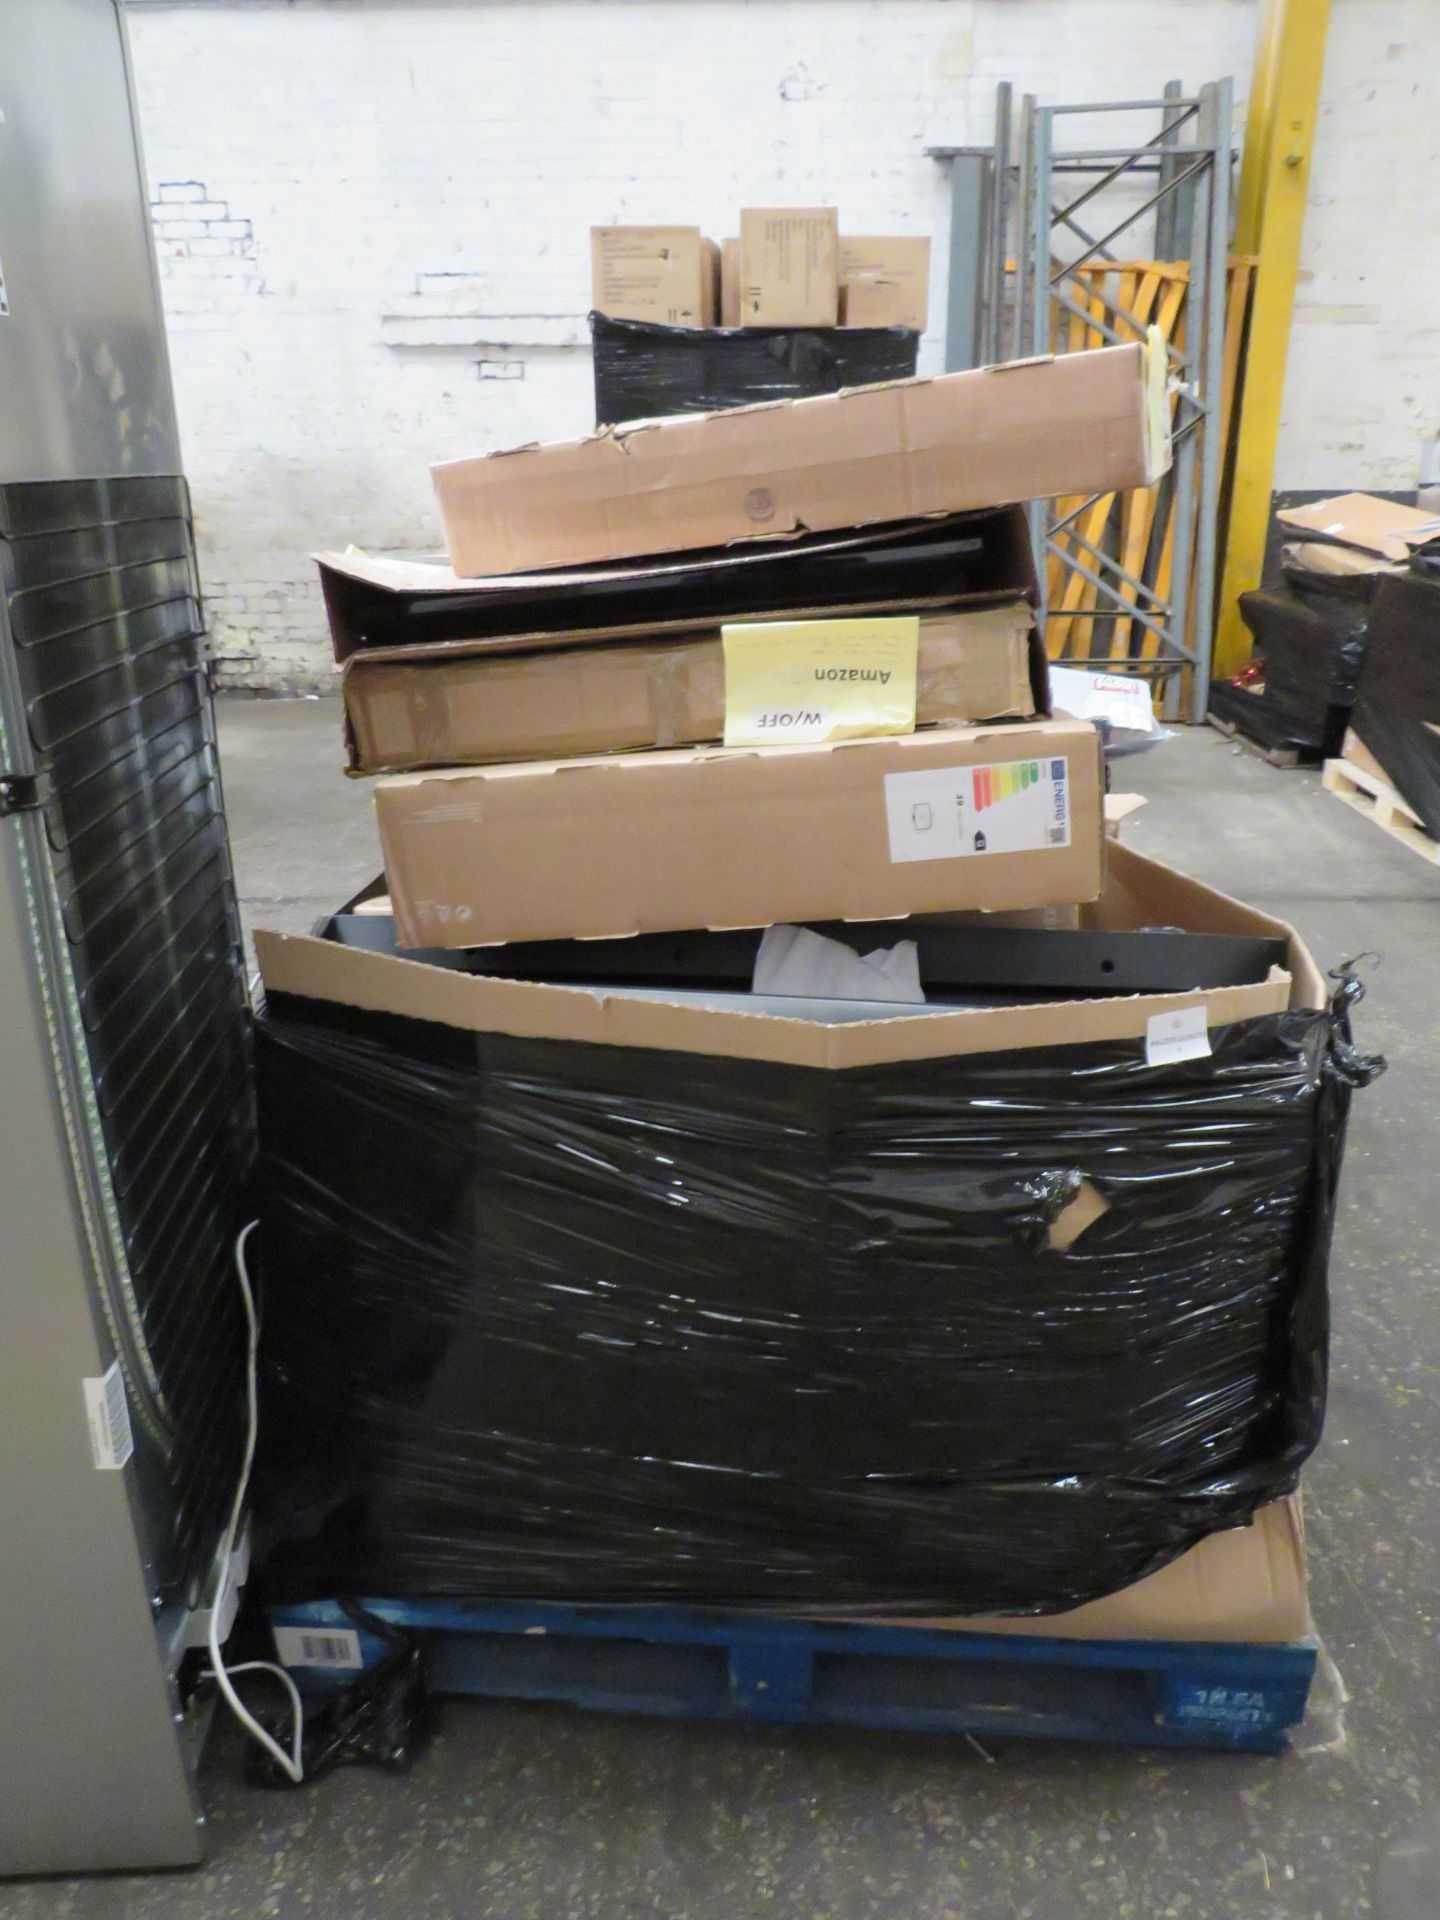 Pallet of approx 12x Smashed screen TV's/Monitors, includes LG, Samsung and HP.